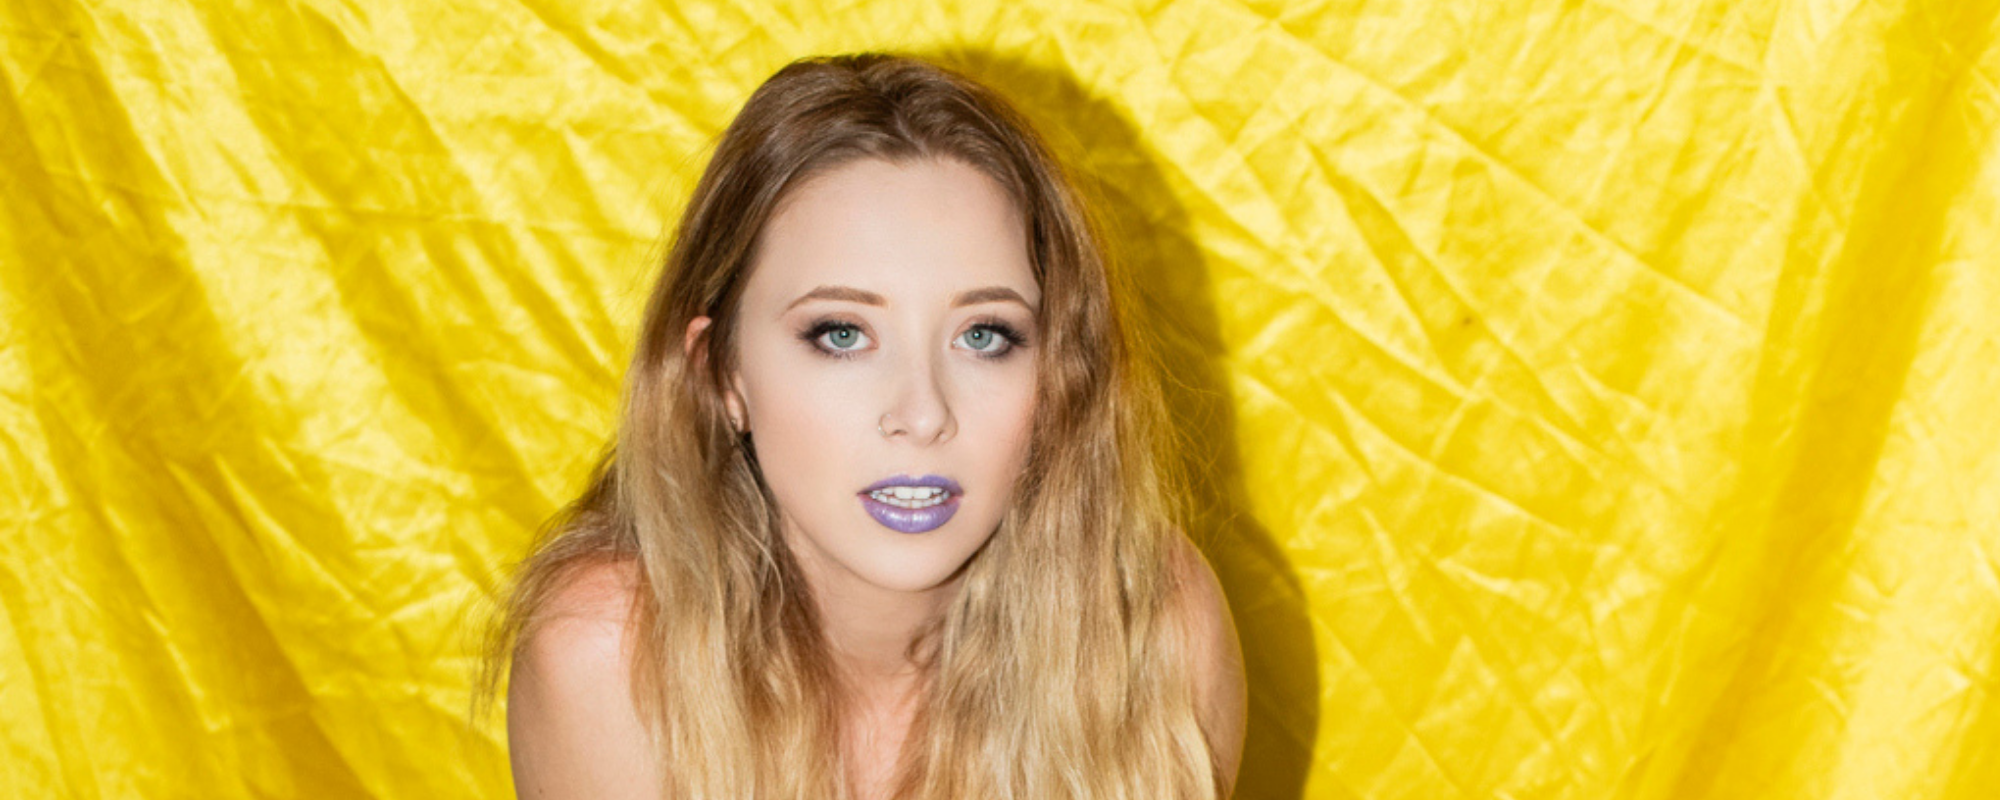 Kalie Shorr Heralds New EP  ‘I Got Here By Accident’ with Autobiographical “Love Child”